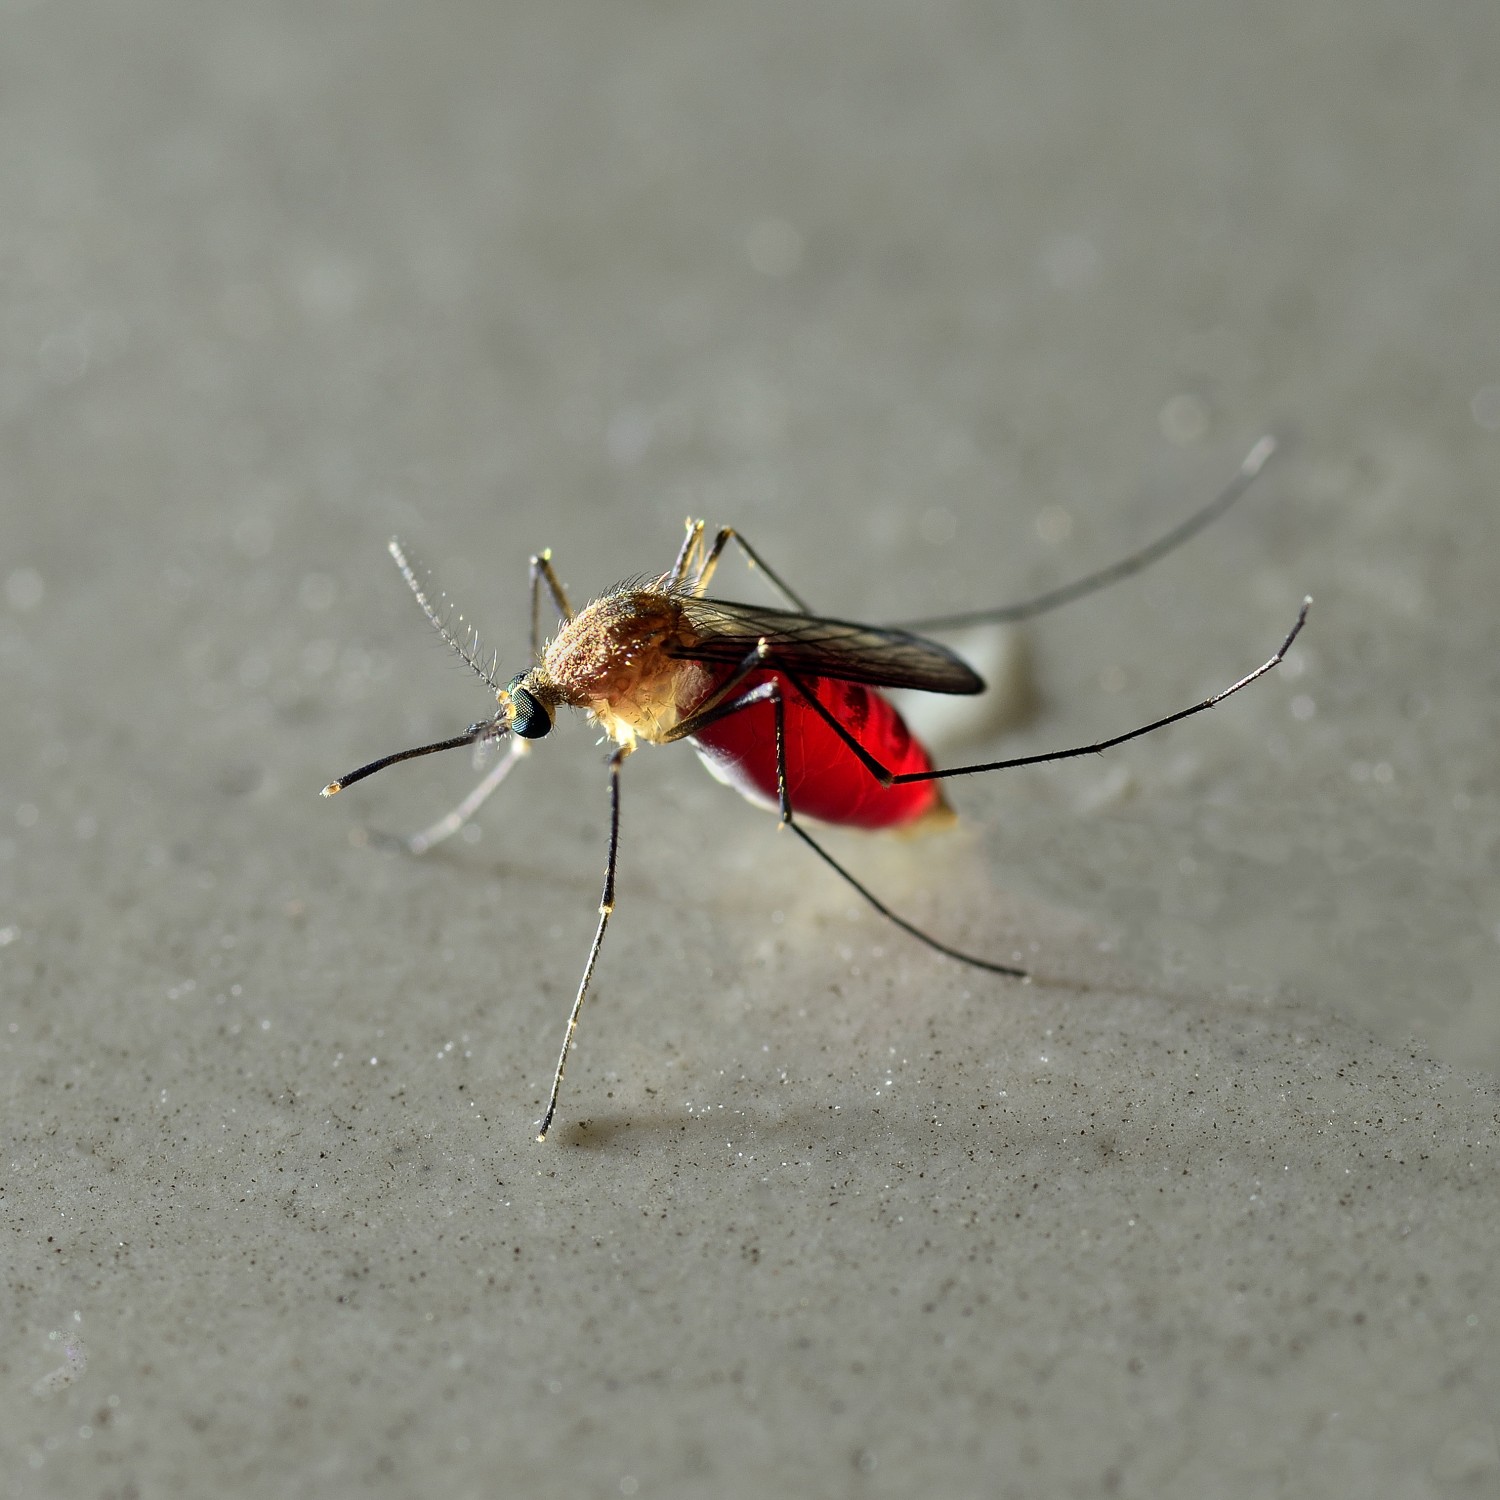 Image of a Mosquito